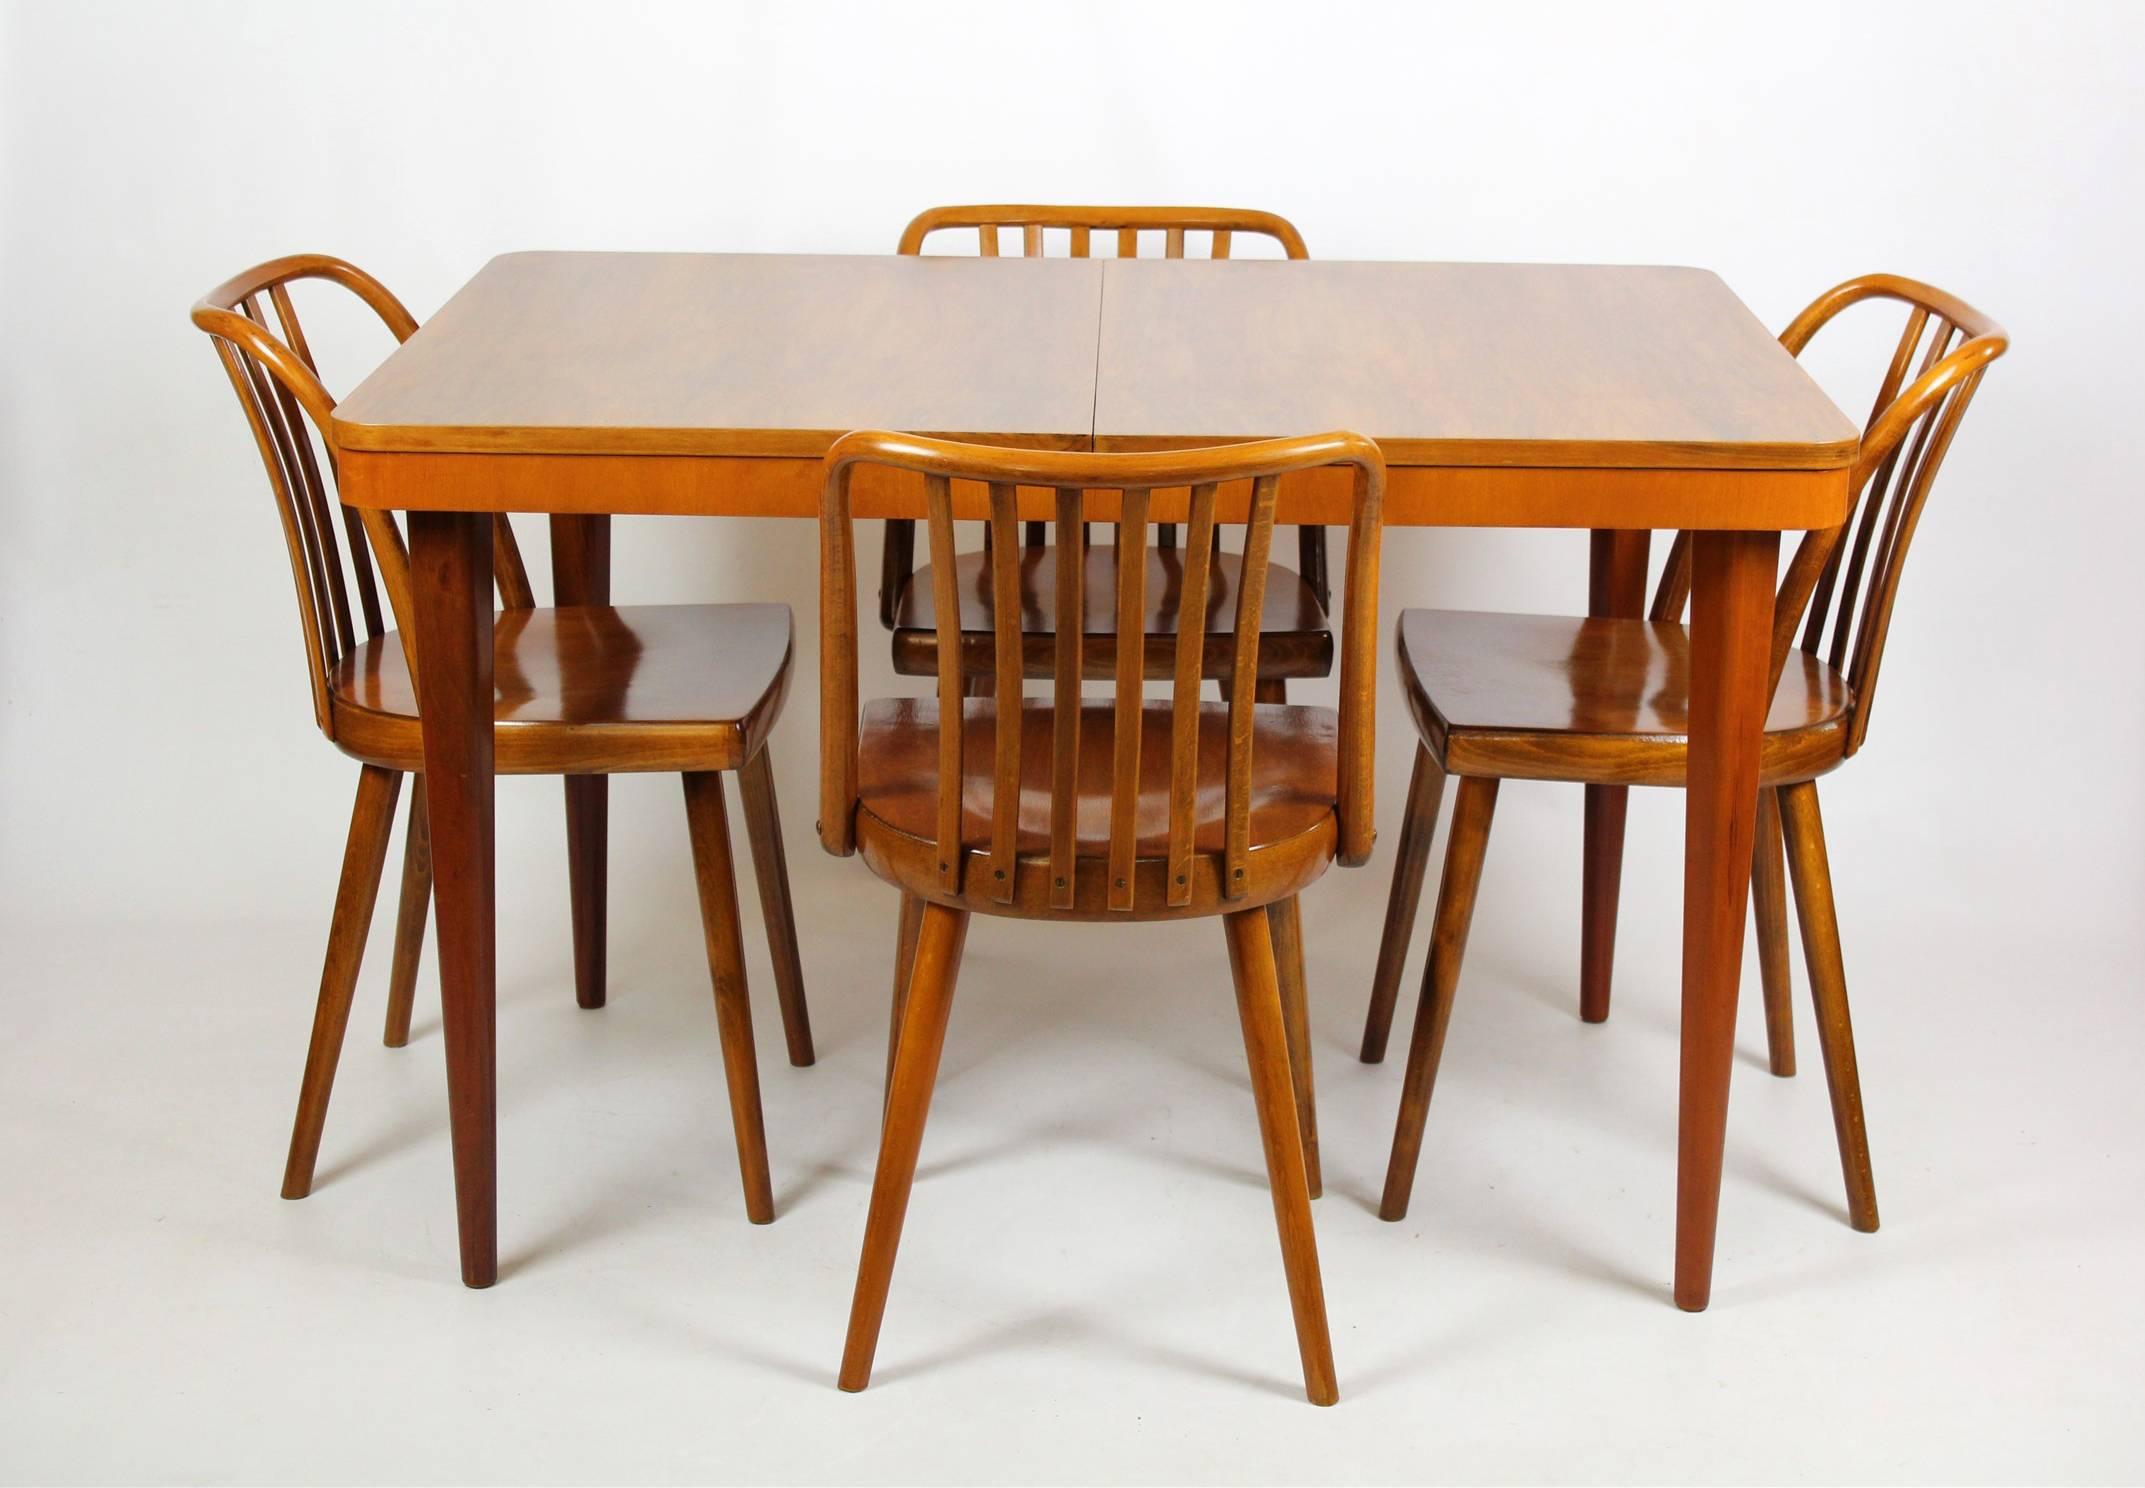 Set of four wooden chairs designed by Antonin Suman for TON (formerly Thonet) in the mid-1960s. Backrests are made of bent beechwood. Chairs are fully stabile, woodwork is in very good condition. Measures: Seat height is 45cm.